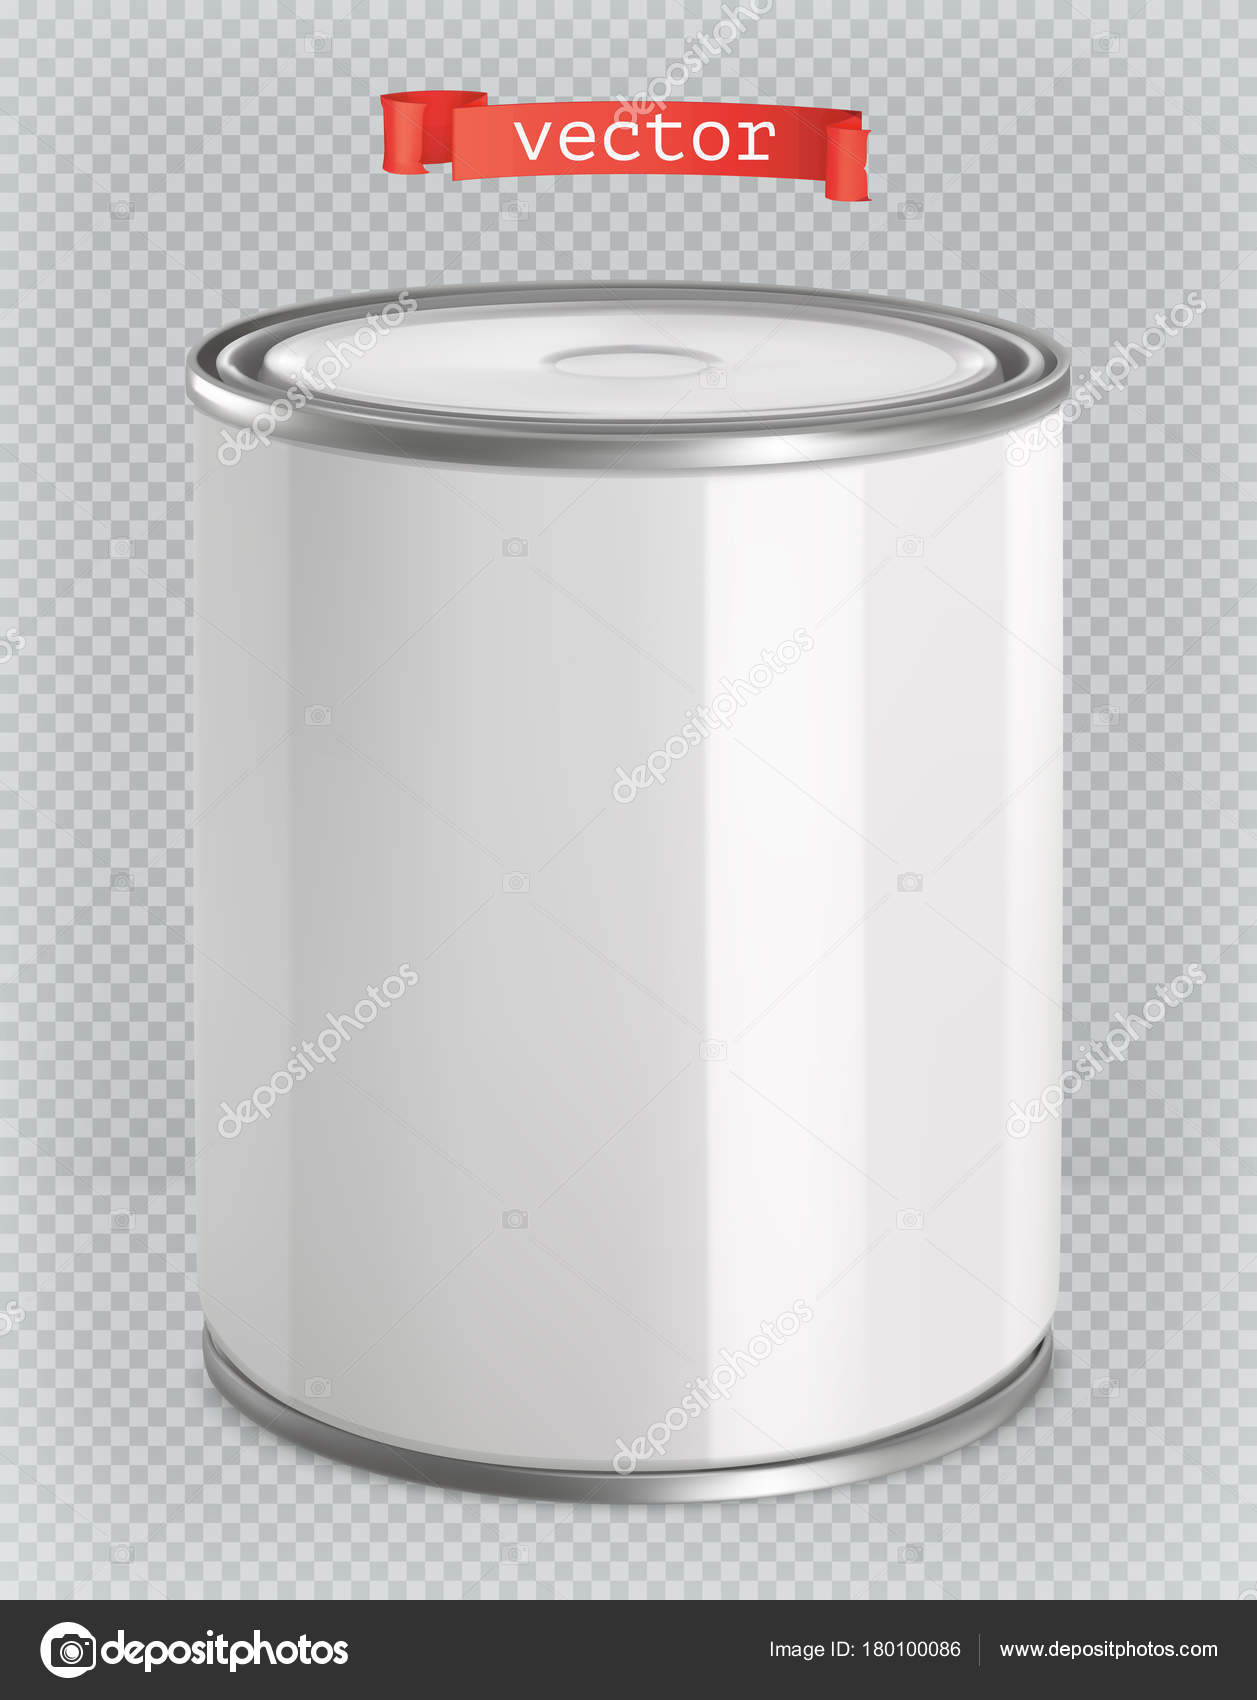 Download Packaging Building And Sanitary White Tin Of Paint 3d Realism Vector Mockup Vector Image By C Natis76 Vector Stock 180100086